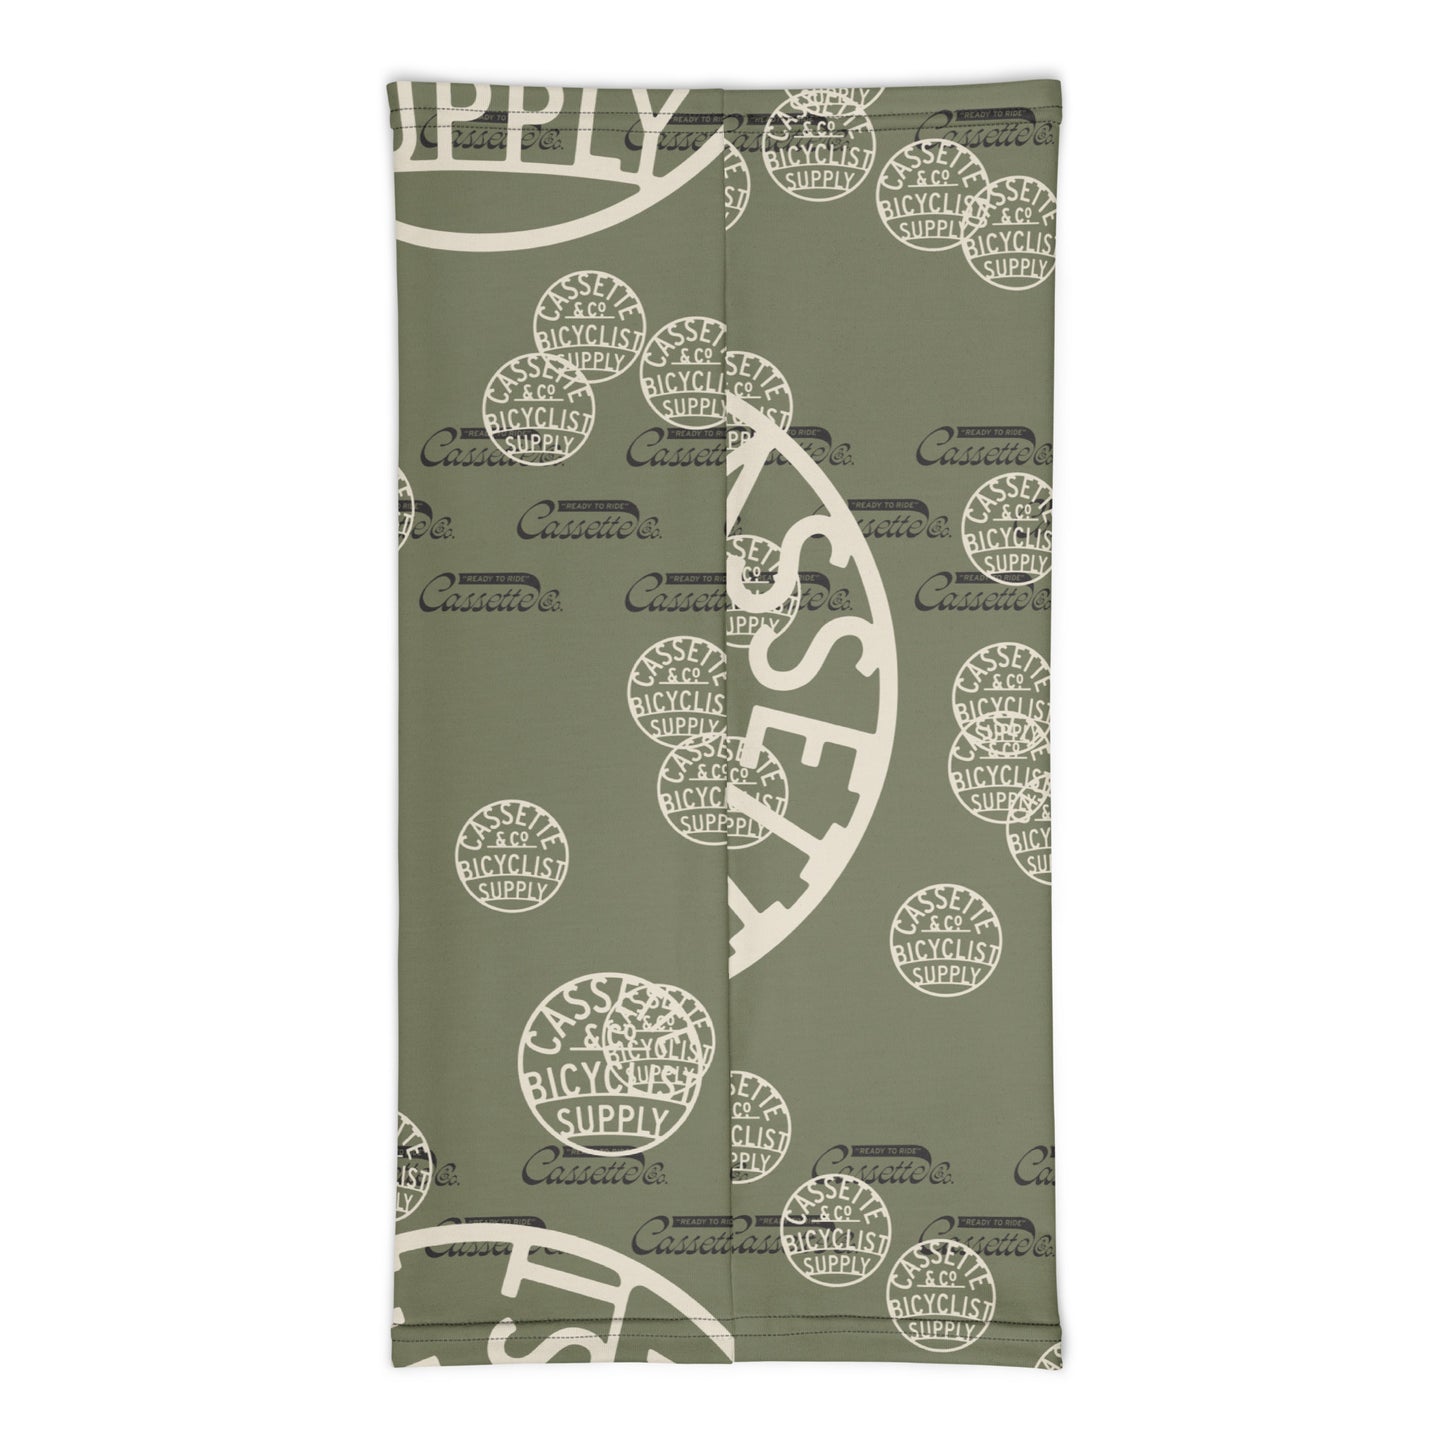 neck gaiter with random logos scattered around and in camouflage colors